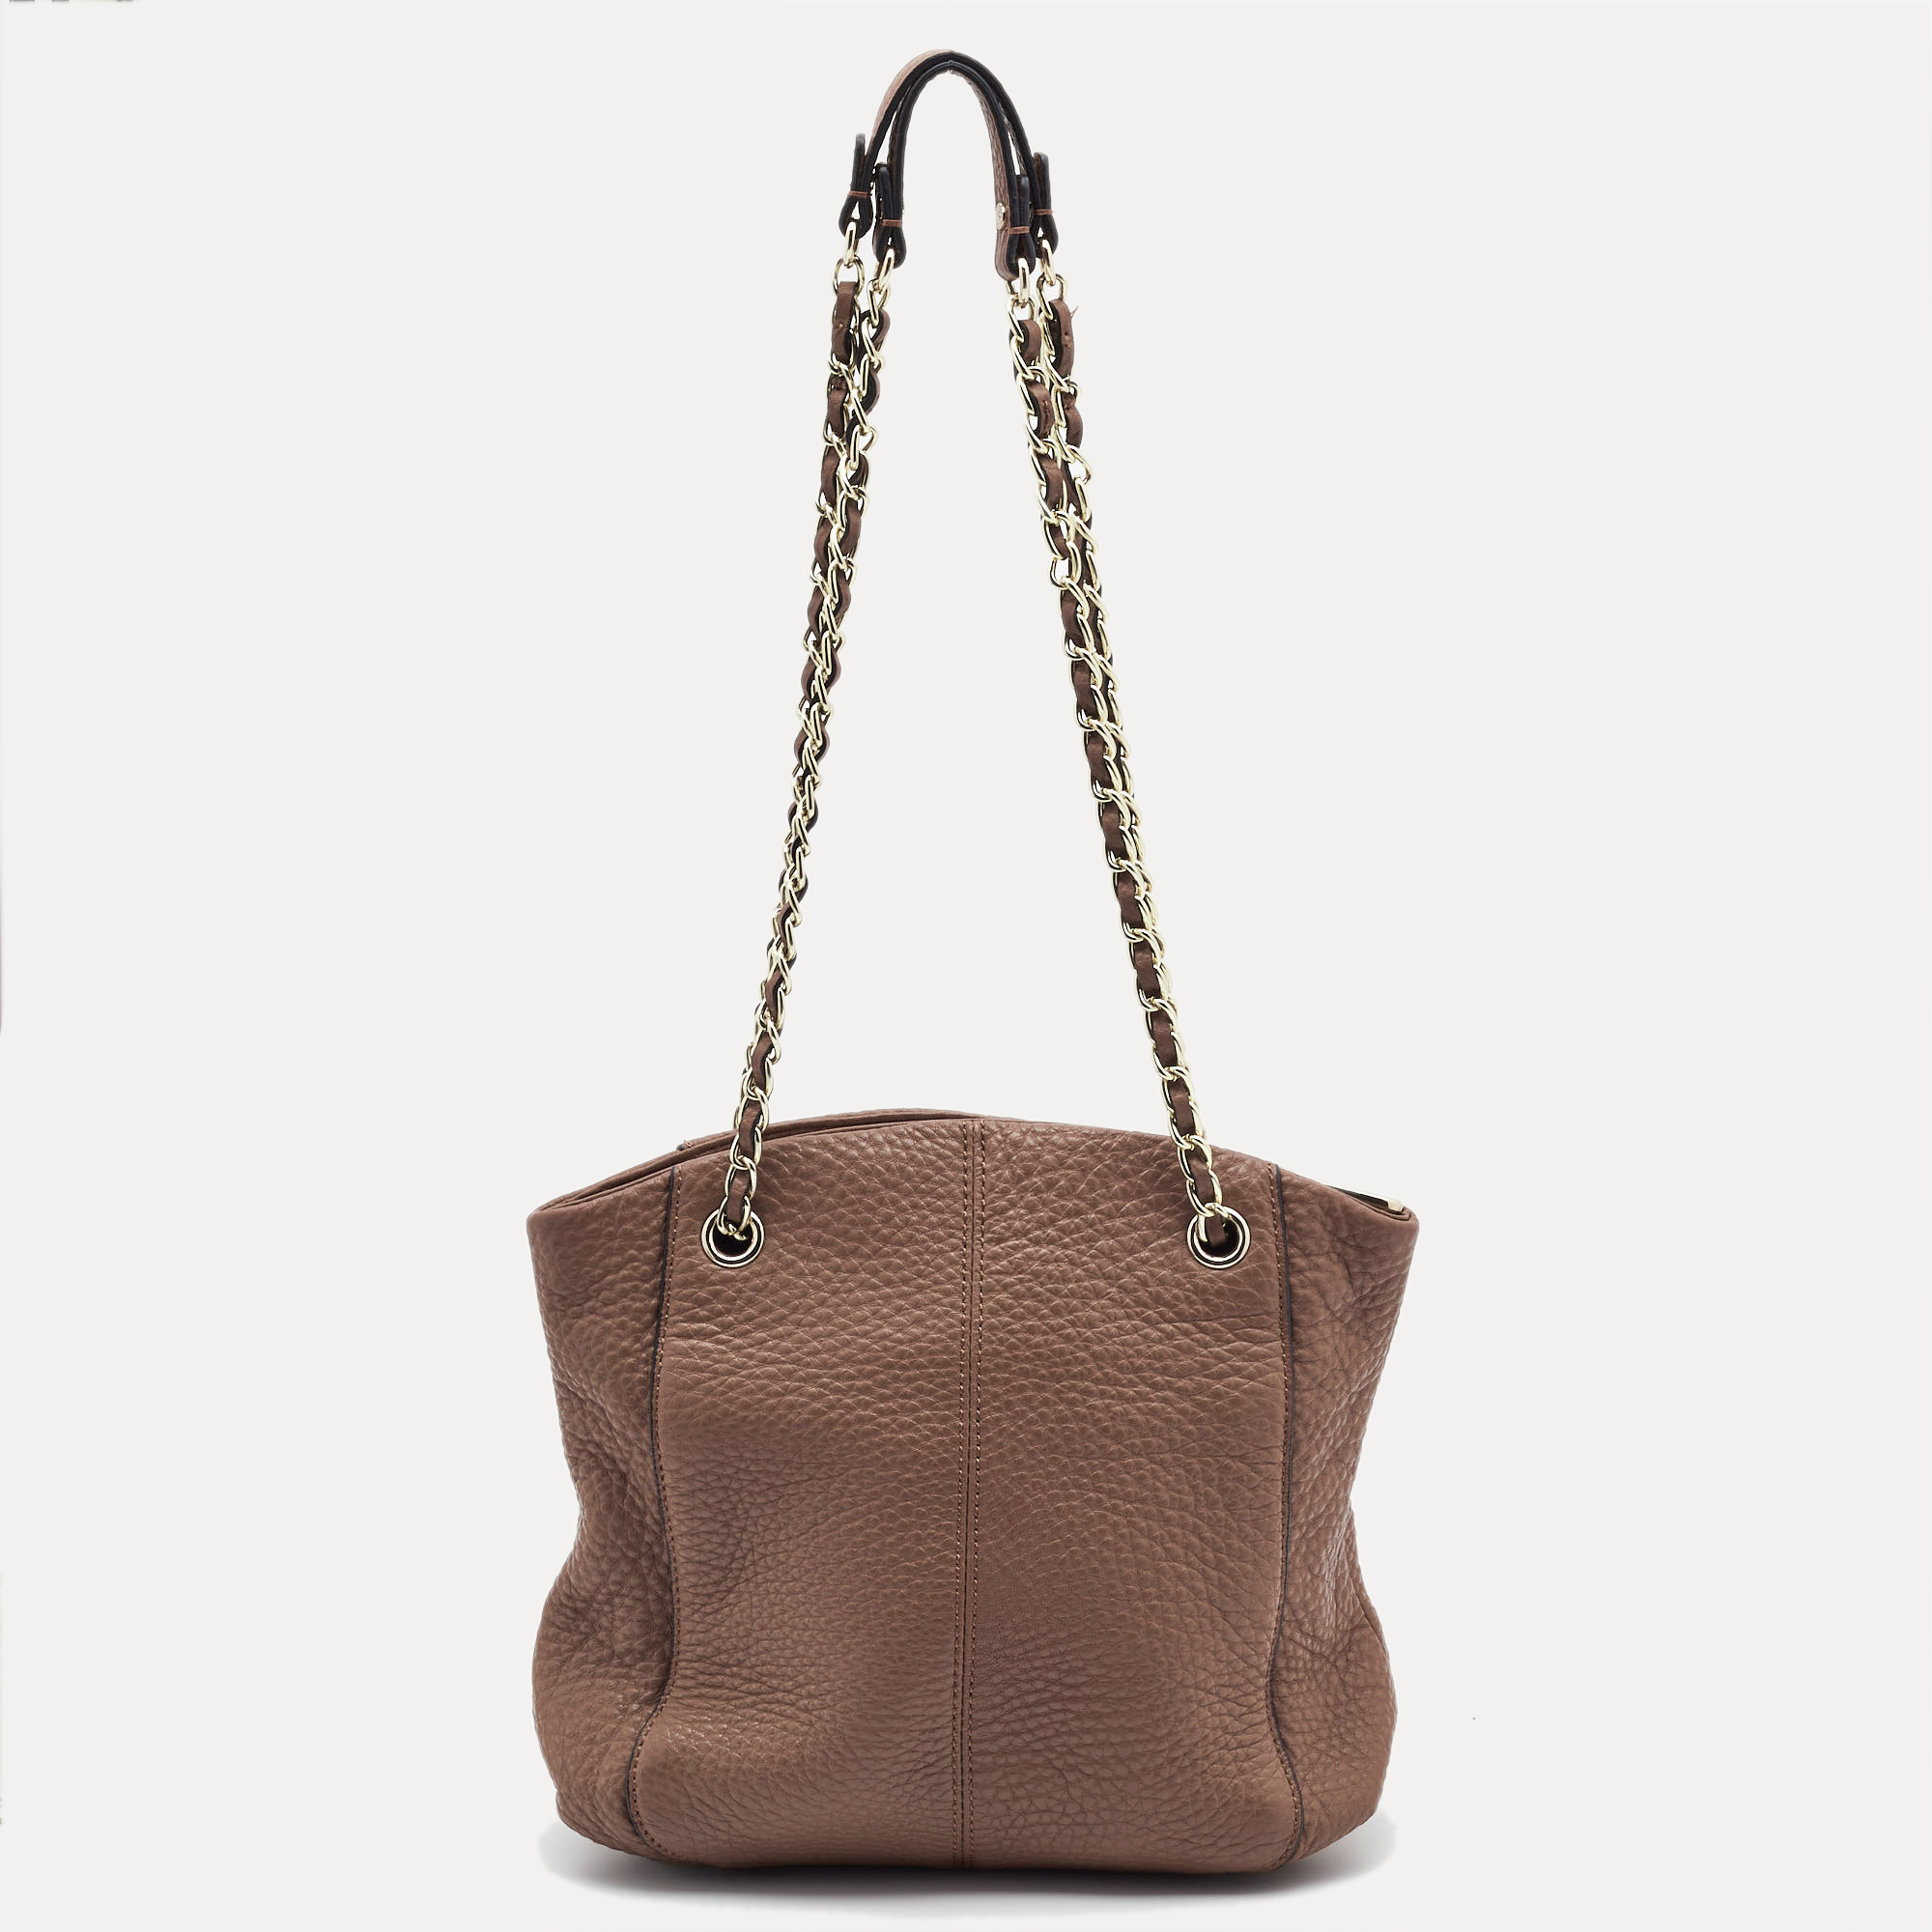 DKNY Brown Pebbled Leather Chain Tote